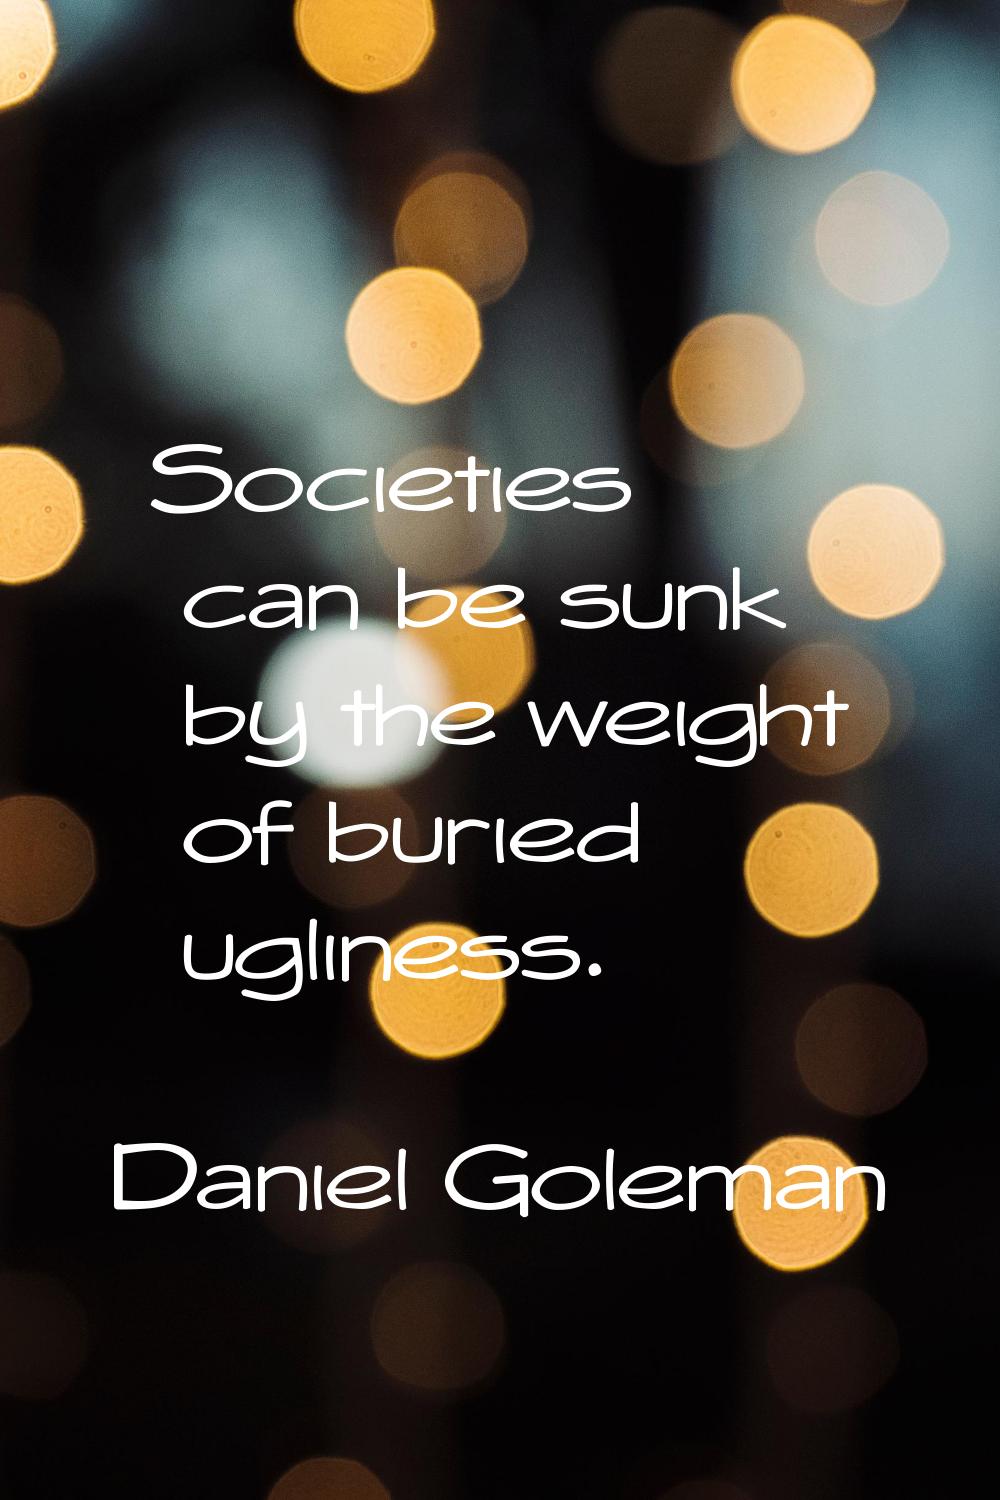 Societies can be sunk by the weight of buried ugliness.